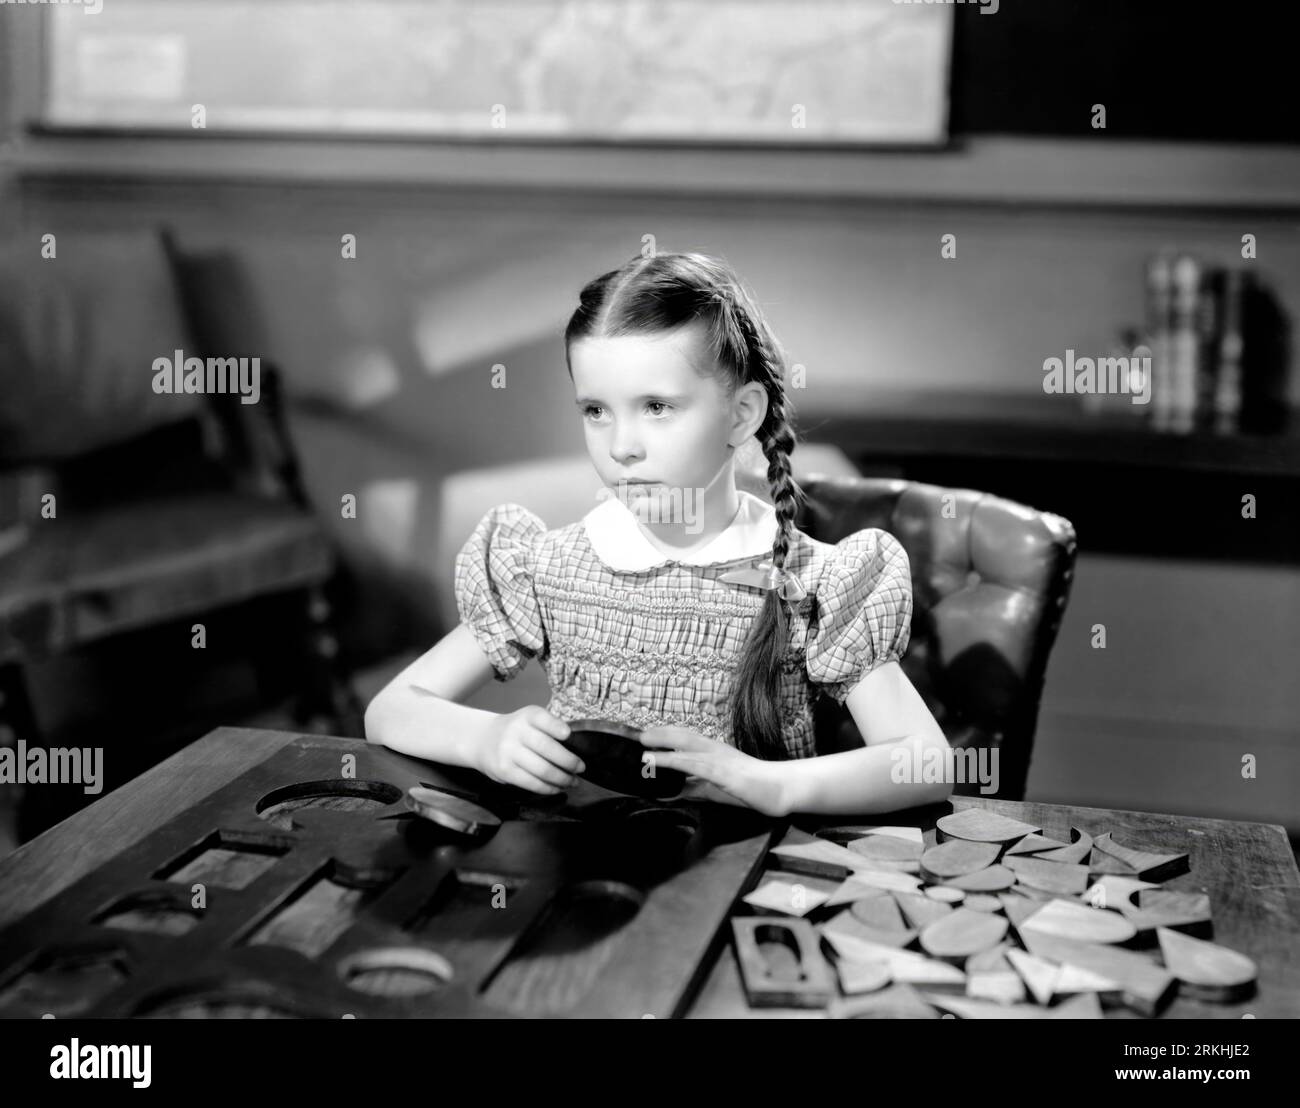 MARGARET O'BRIEN in LOST ANGEL (1943), directed by ROY ROWLAND. Credit: M.G.M. / Album Stock Photo